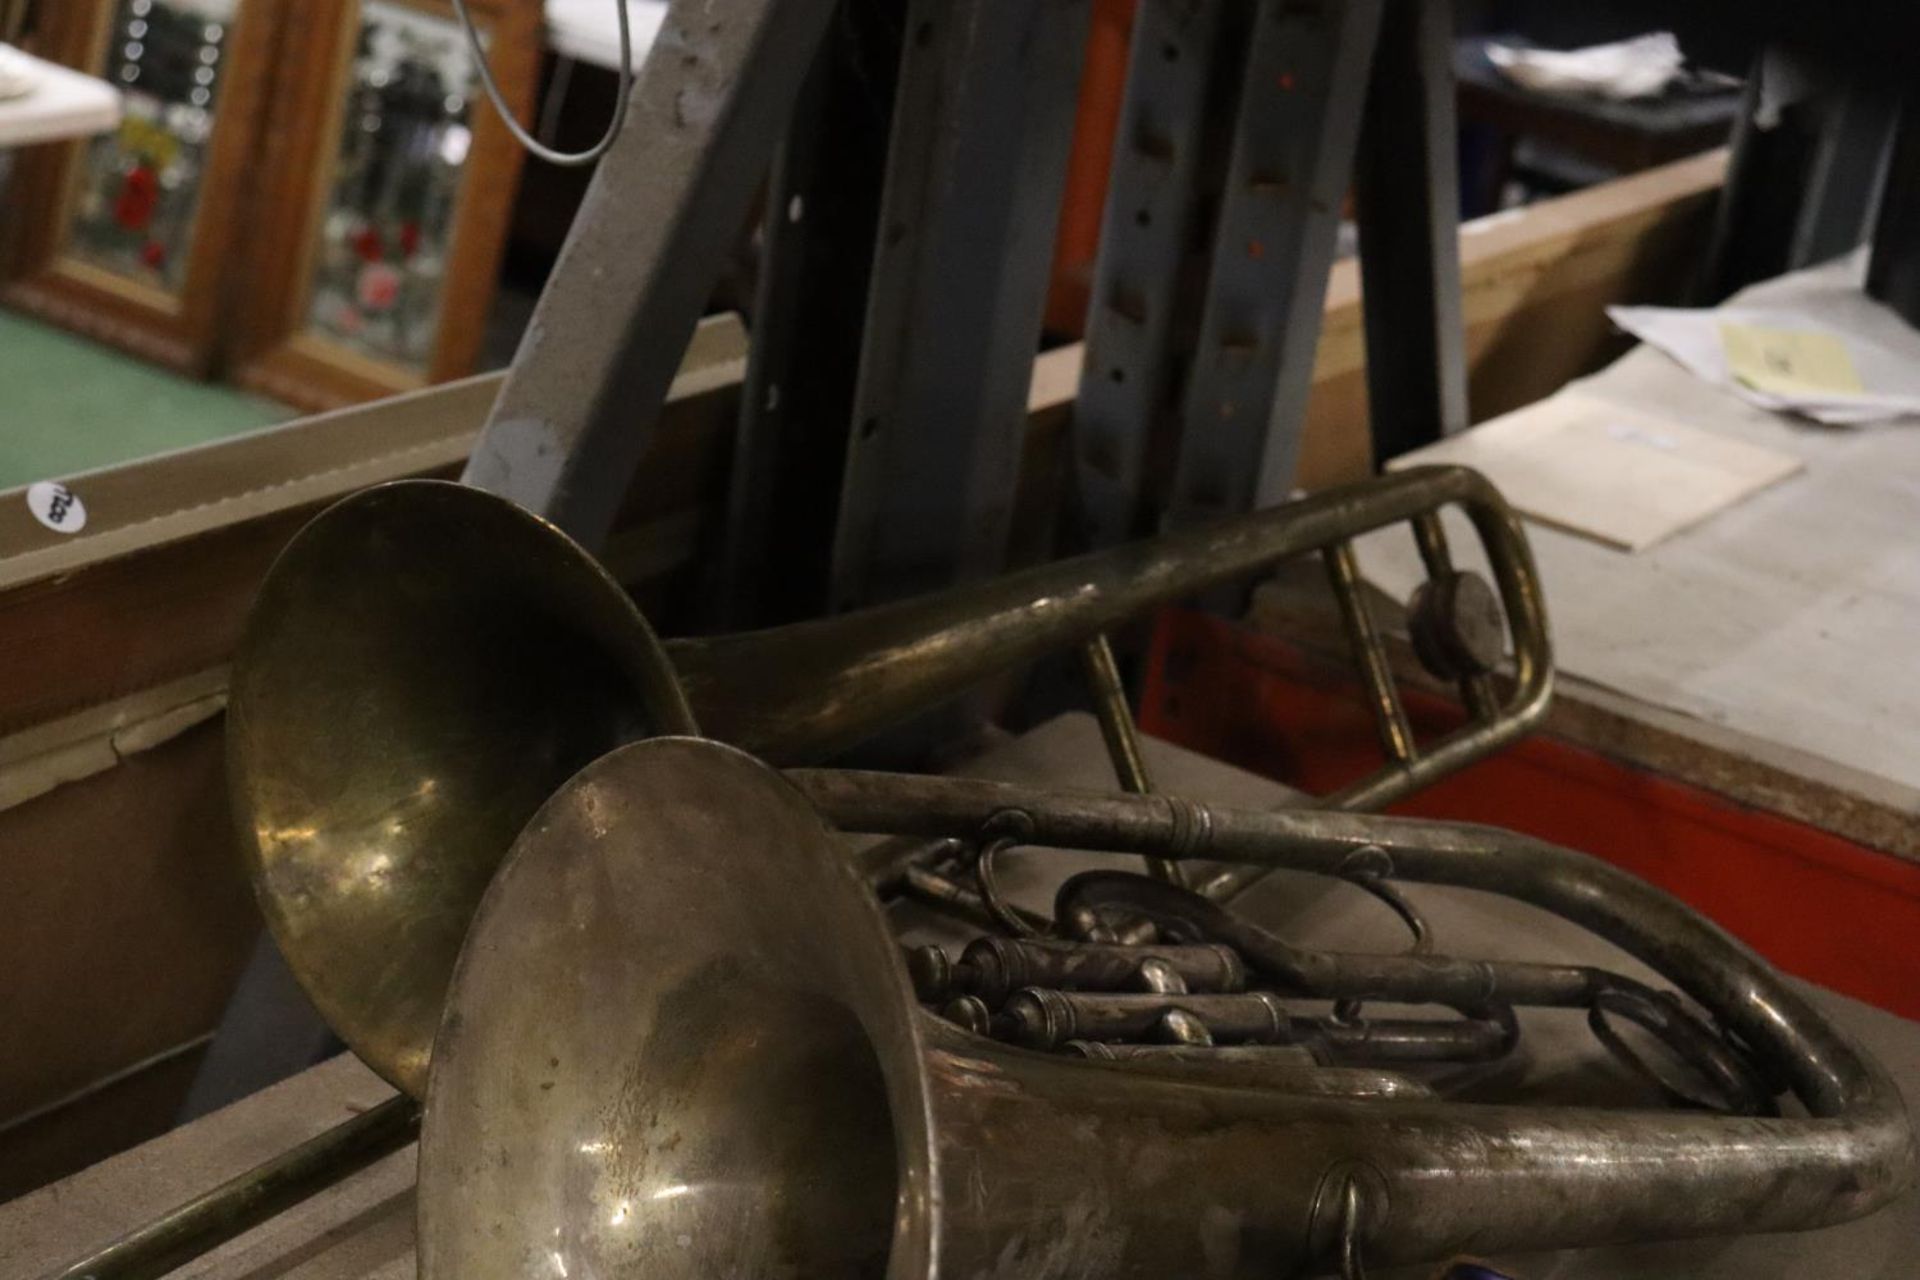 THREE VINTAGE MUSICAL INSTRUMENTS TO INCLUDE A CORNET, BARITONE TENOR HORN AND TROMBONE - Image 5 of 6